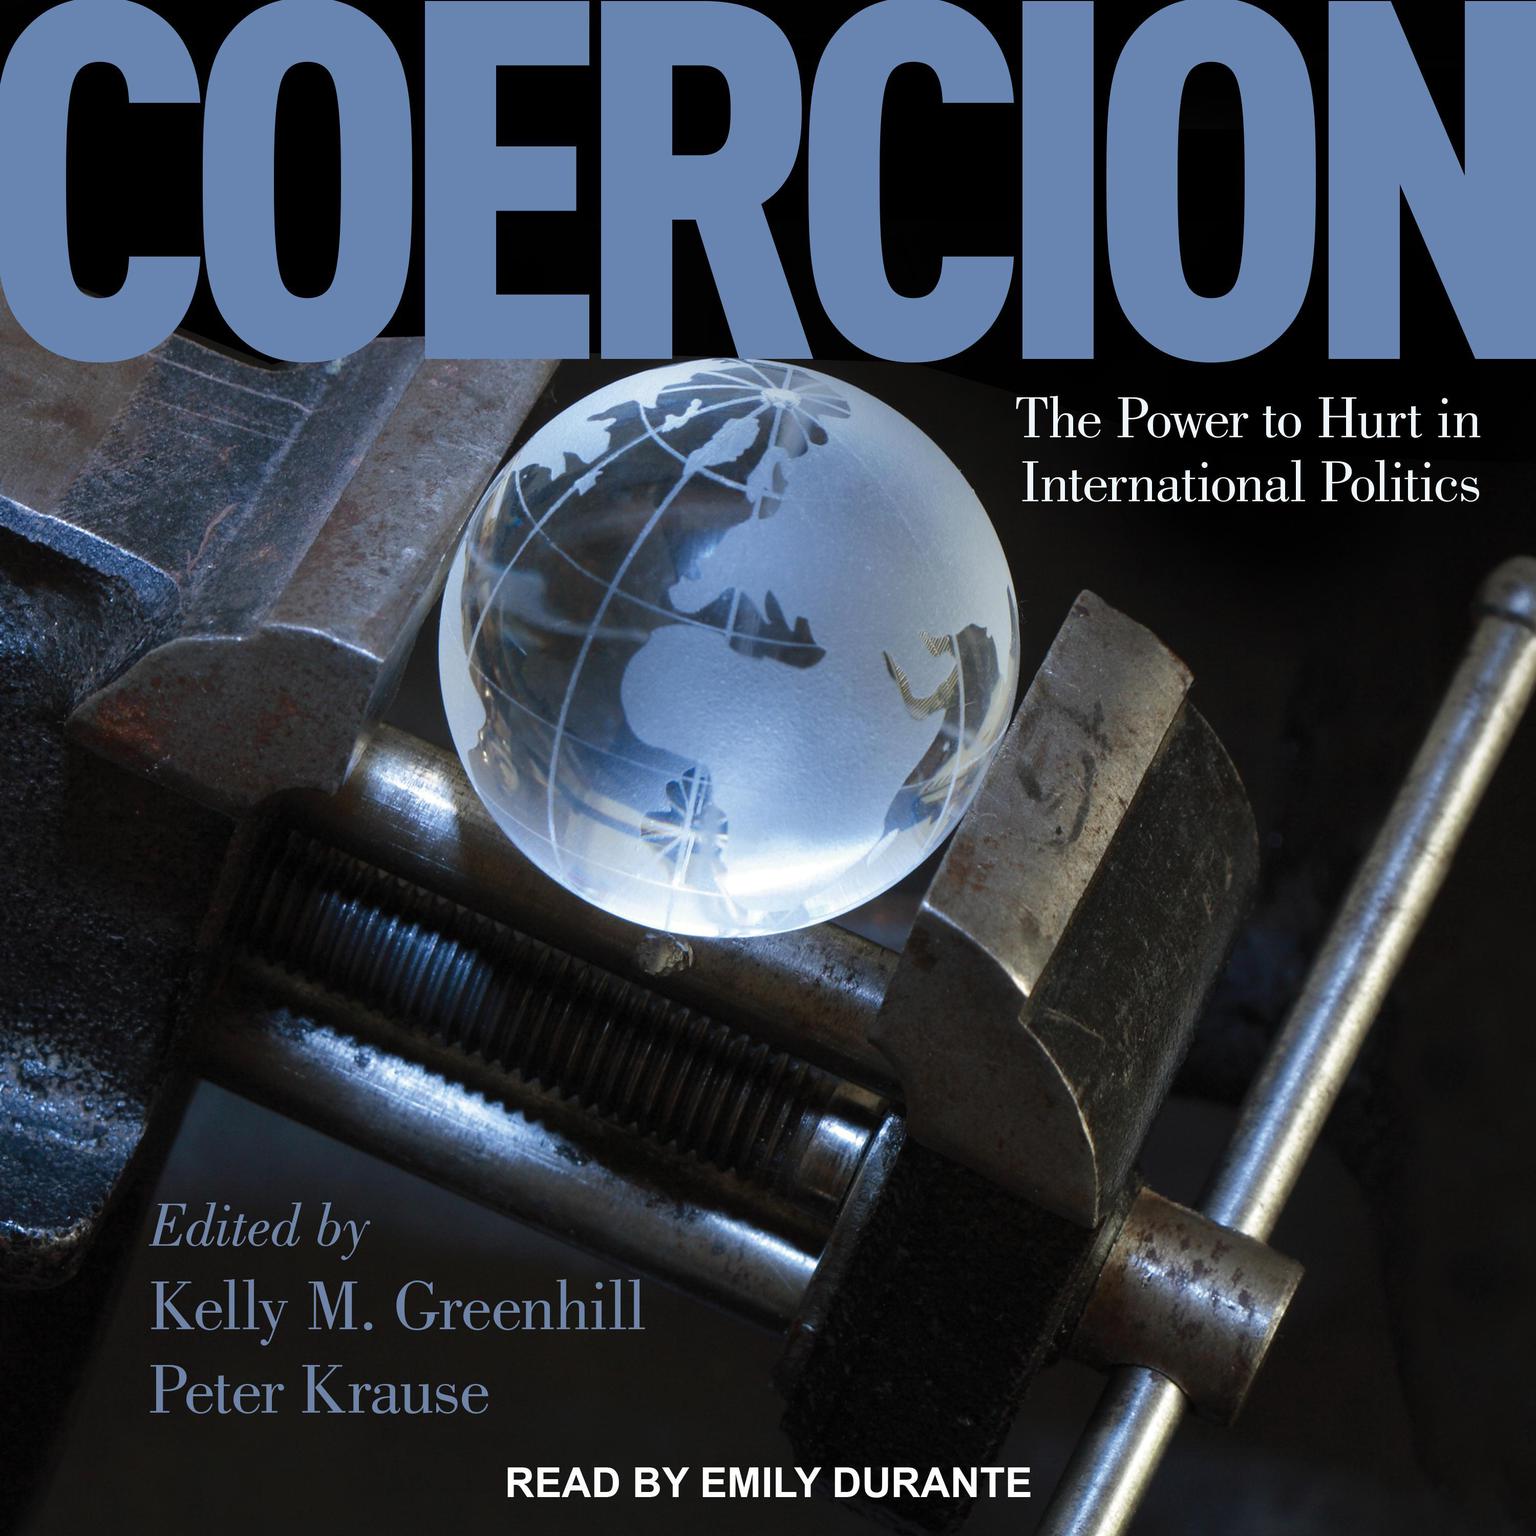 Coercion: The Power to Hurt in International Politics Audiobook, by Kelly M. Greenhill